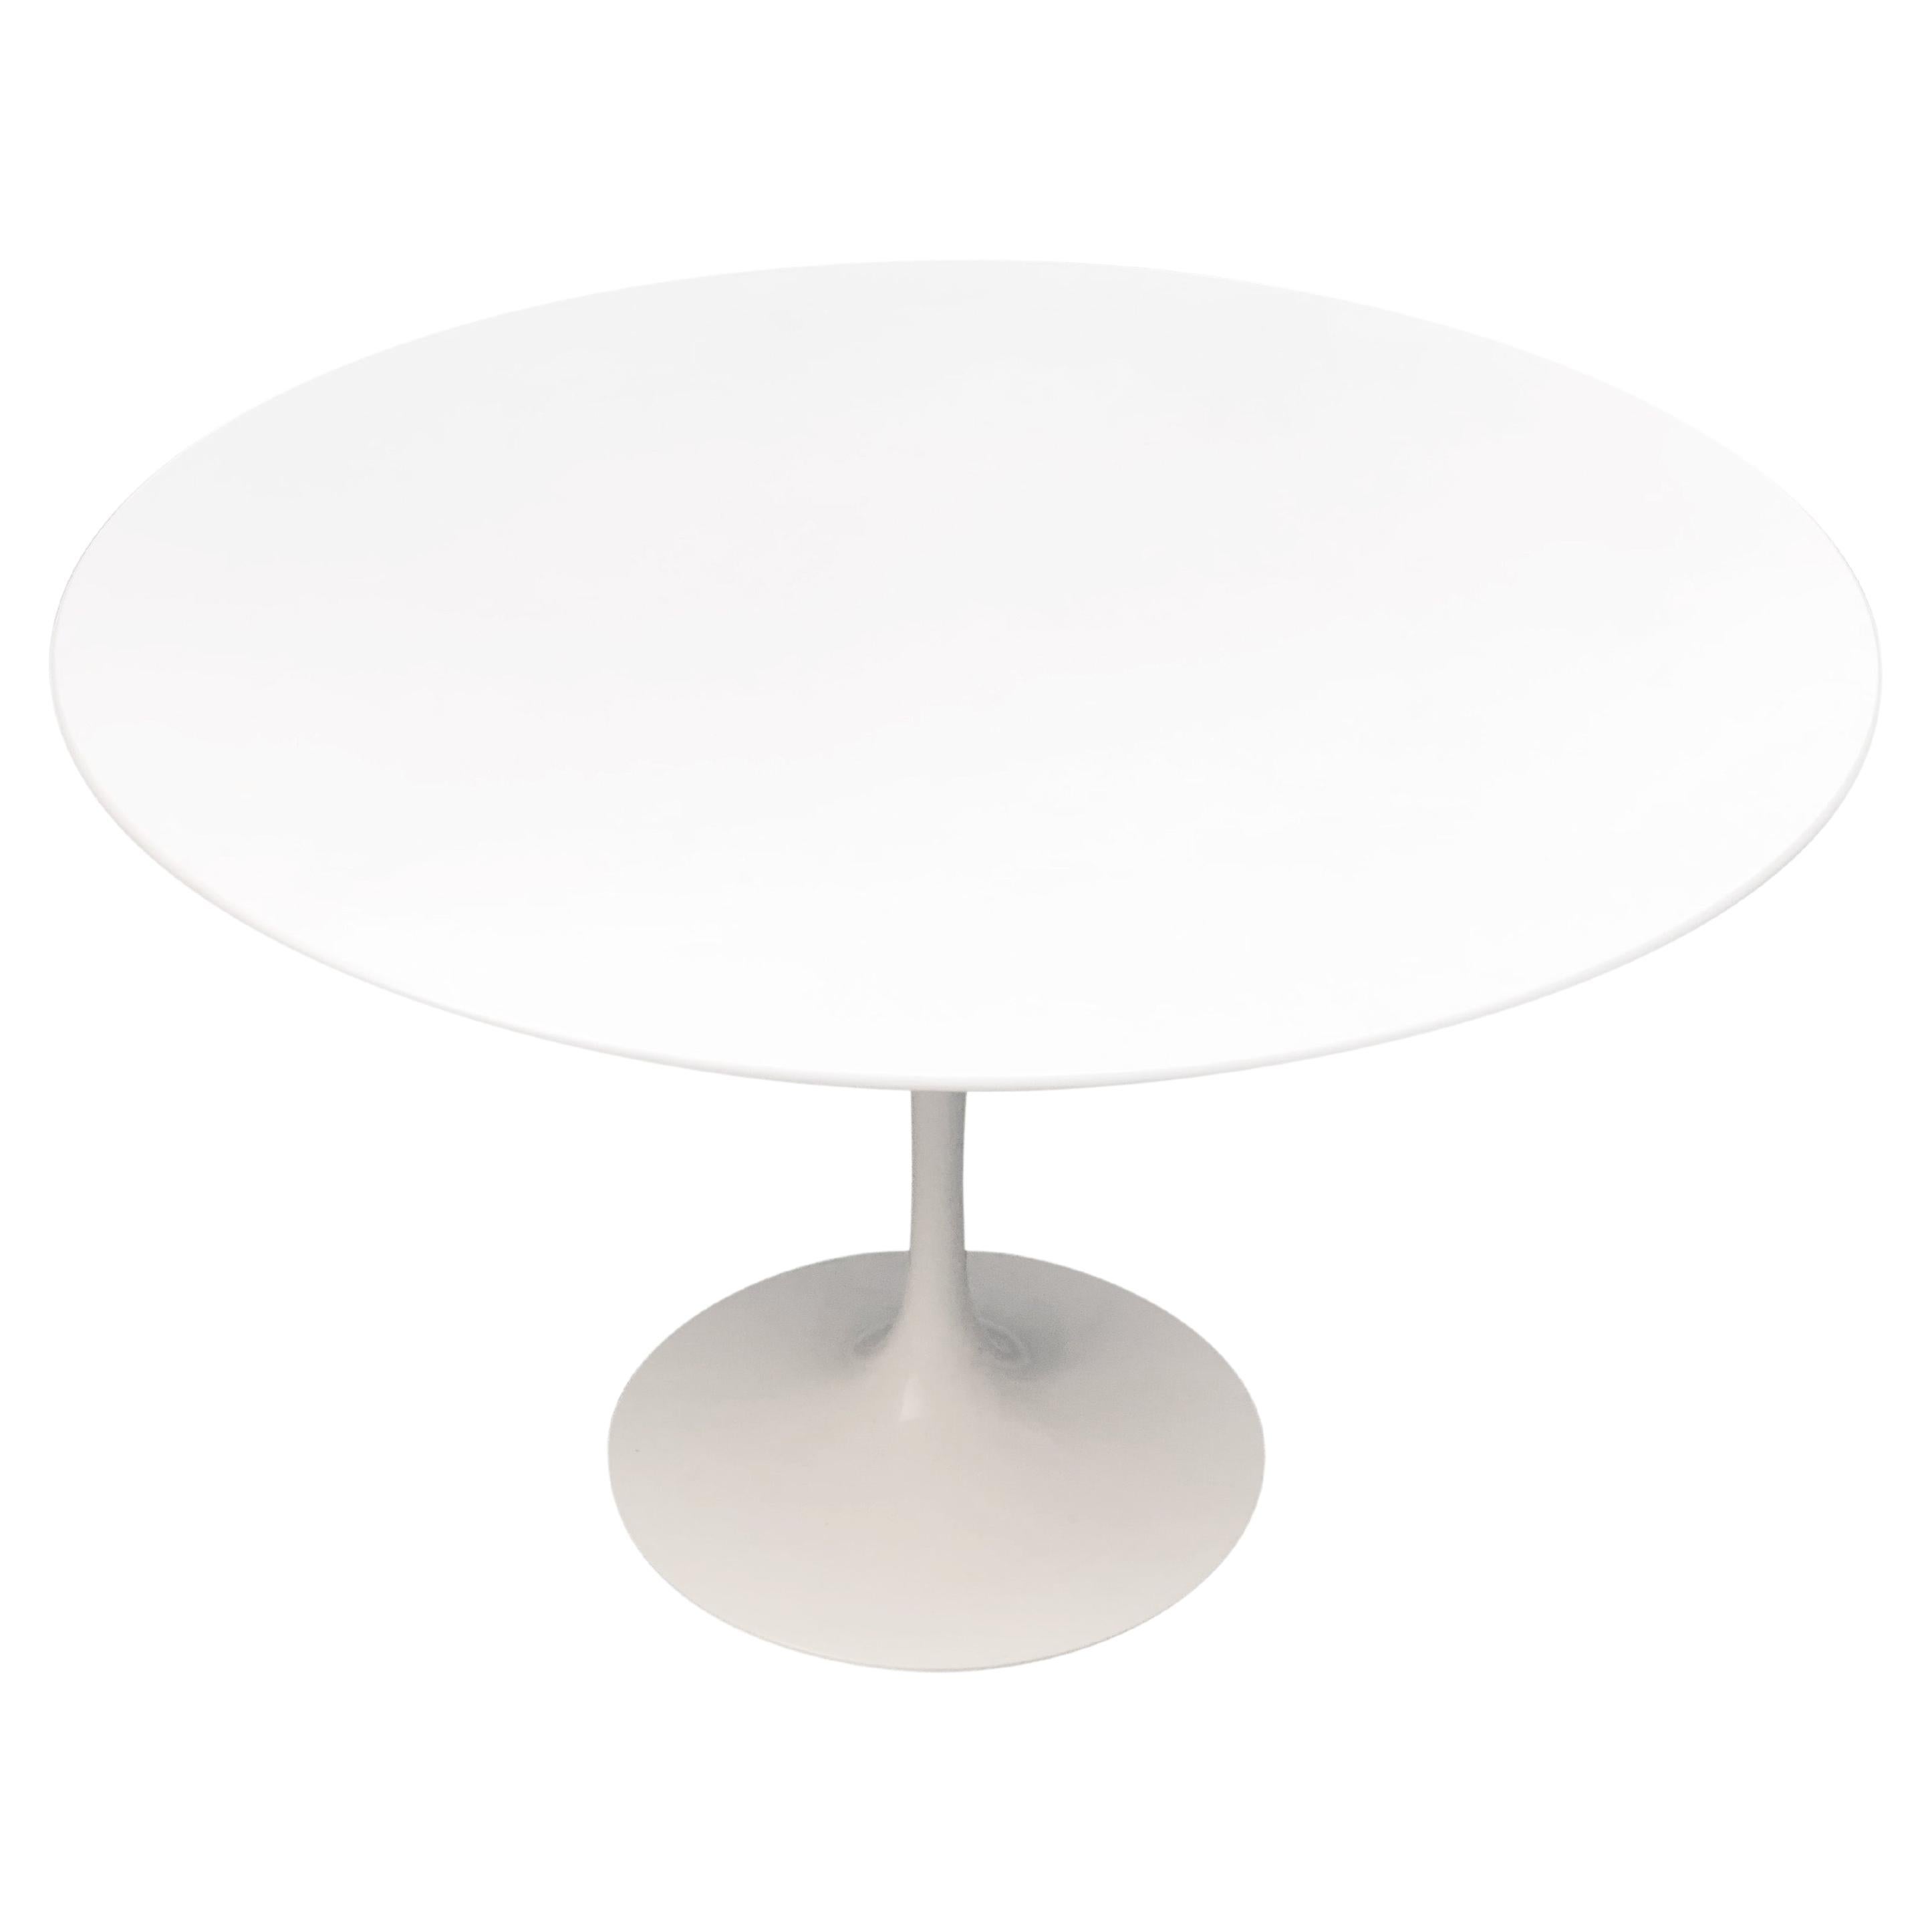 A authentic Eero Saarinen Tulip table in fair to good used condition. Cast aluminum pedestal powder coated in white Rilsan®. Table top appears to be the outdoor version in 'acrylic stone' and not from laminated wood or marble. There are minor